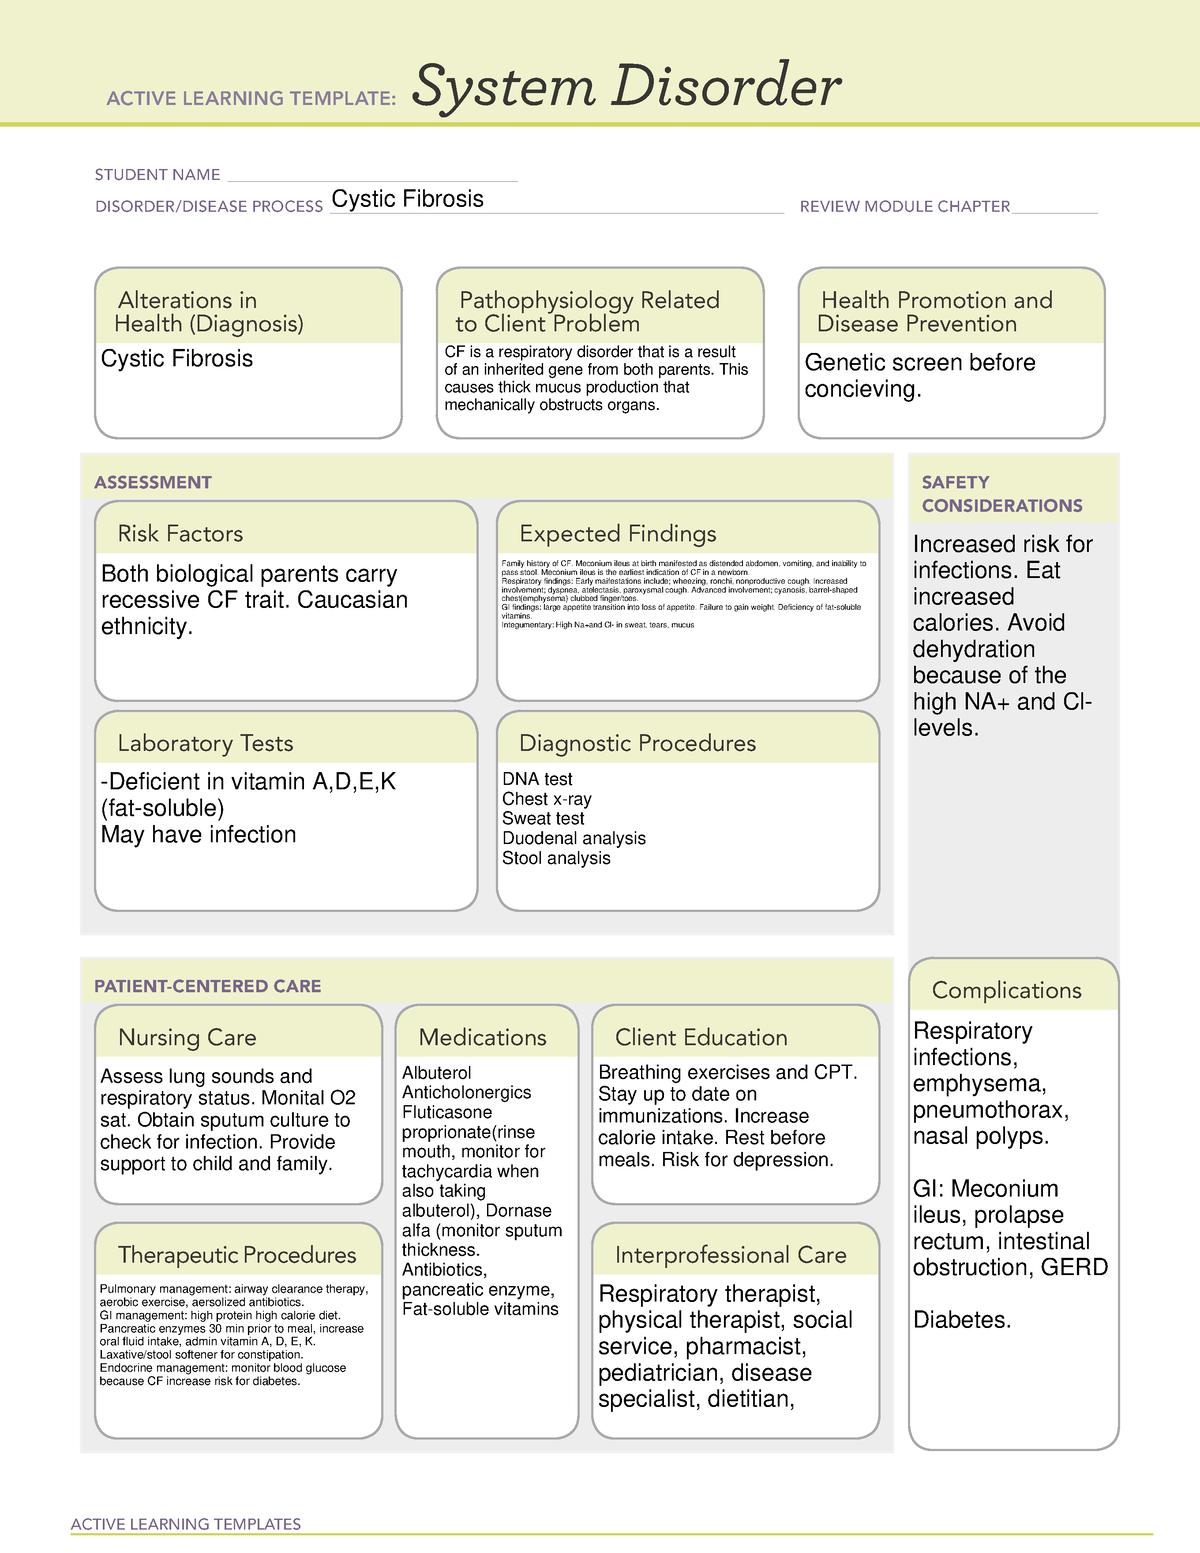 Cystic Fibrosis System Disorder Template